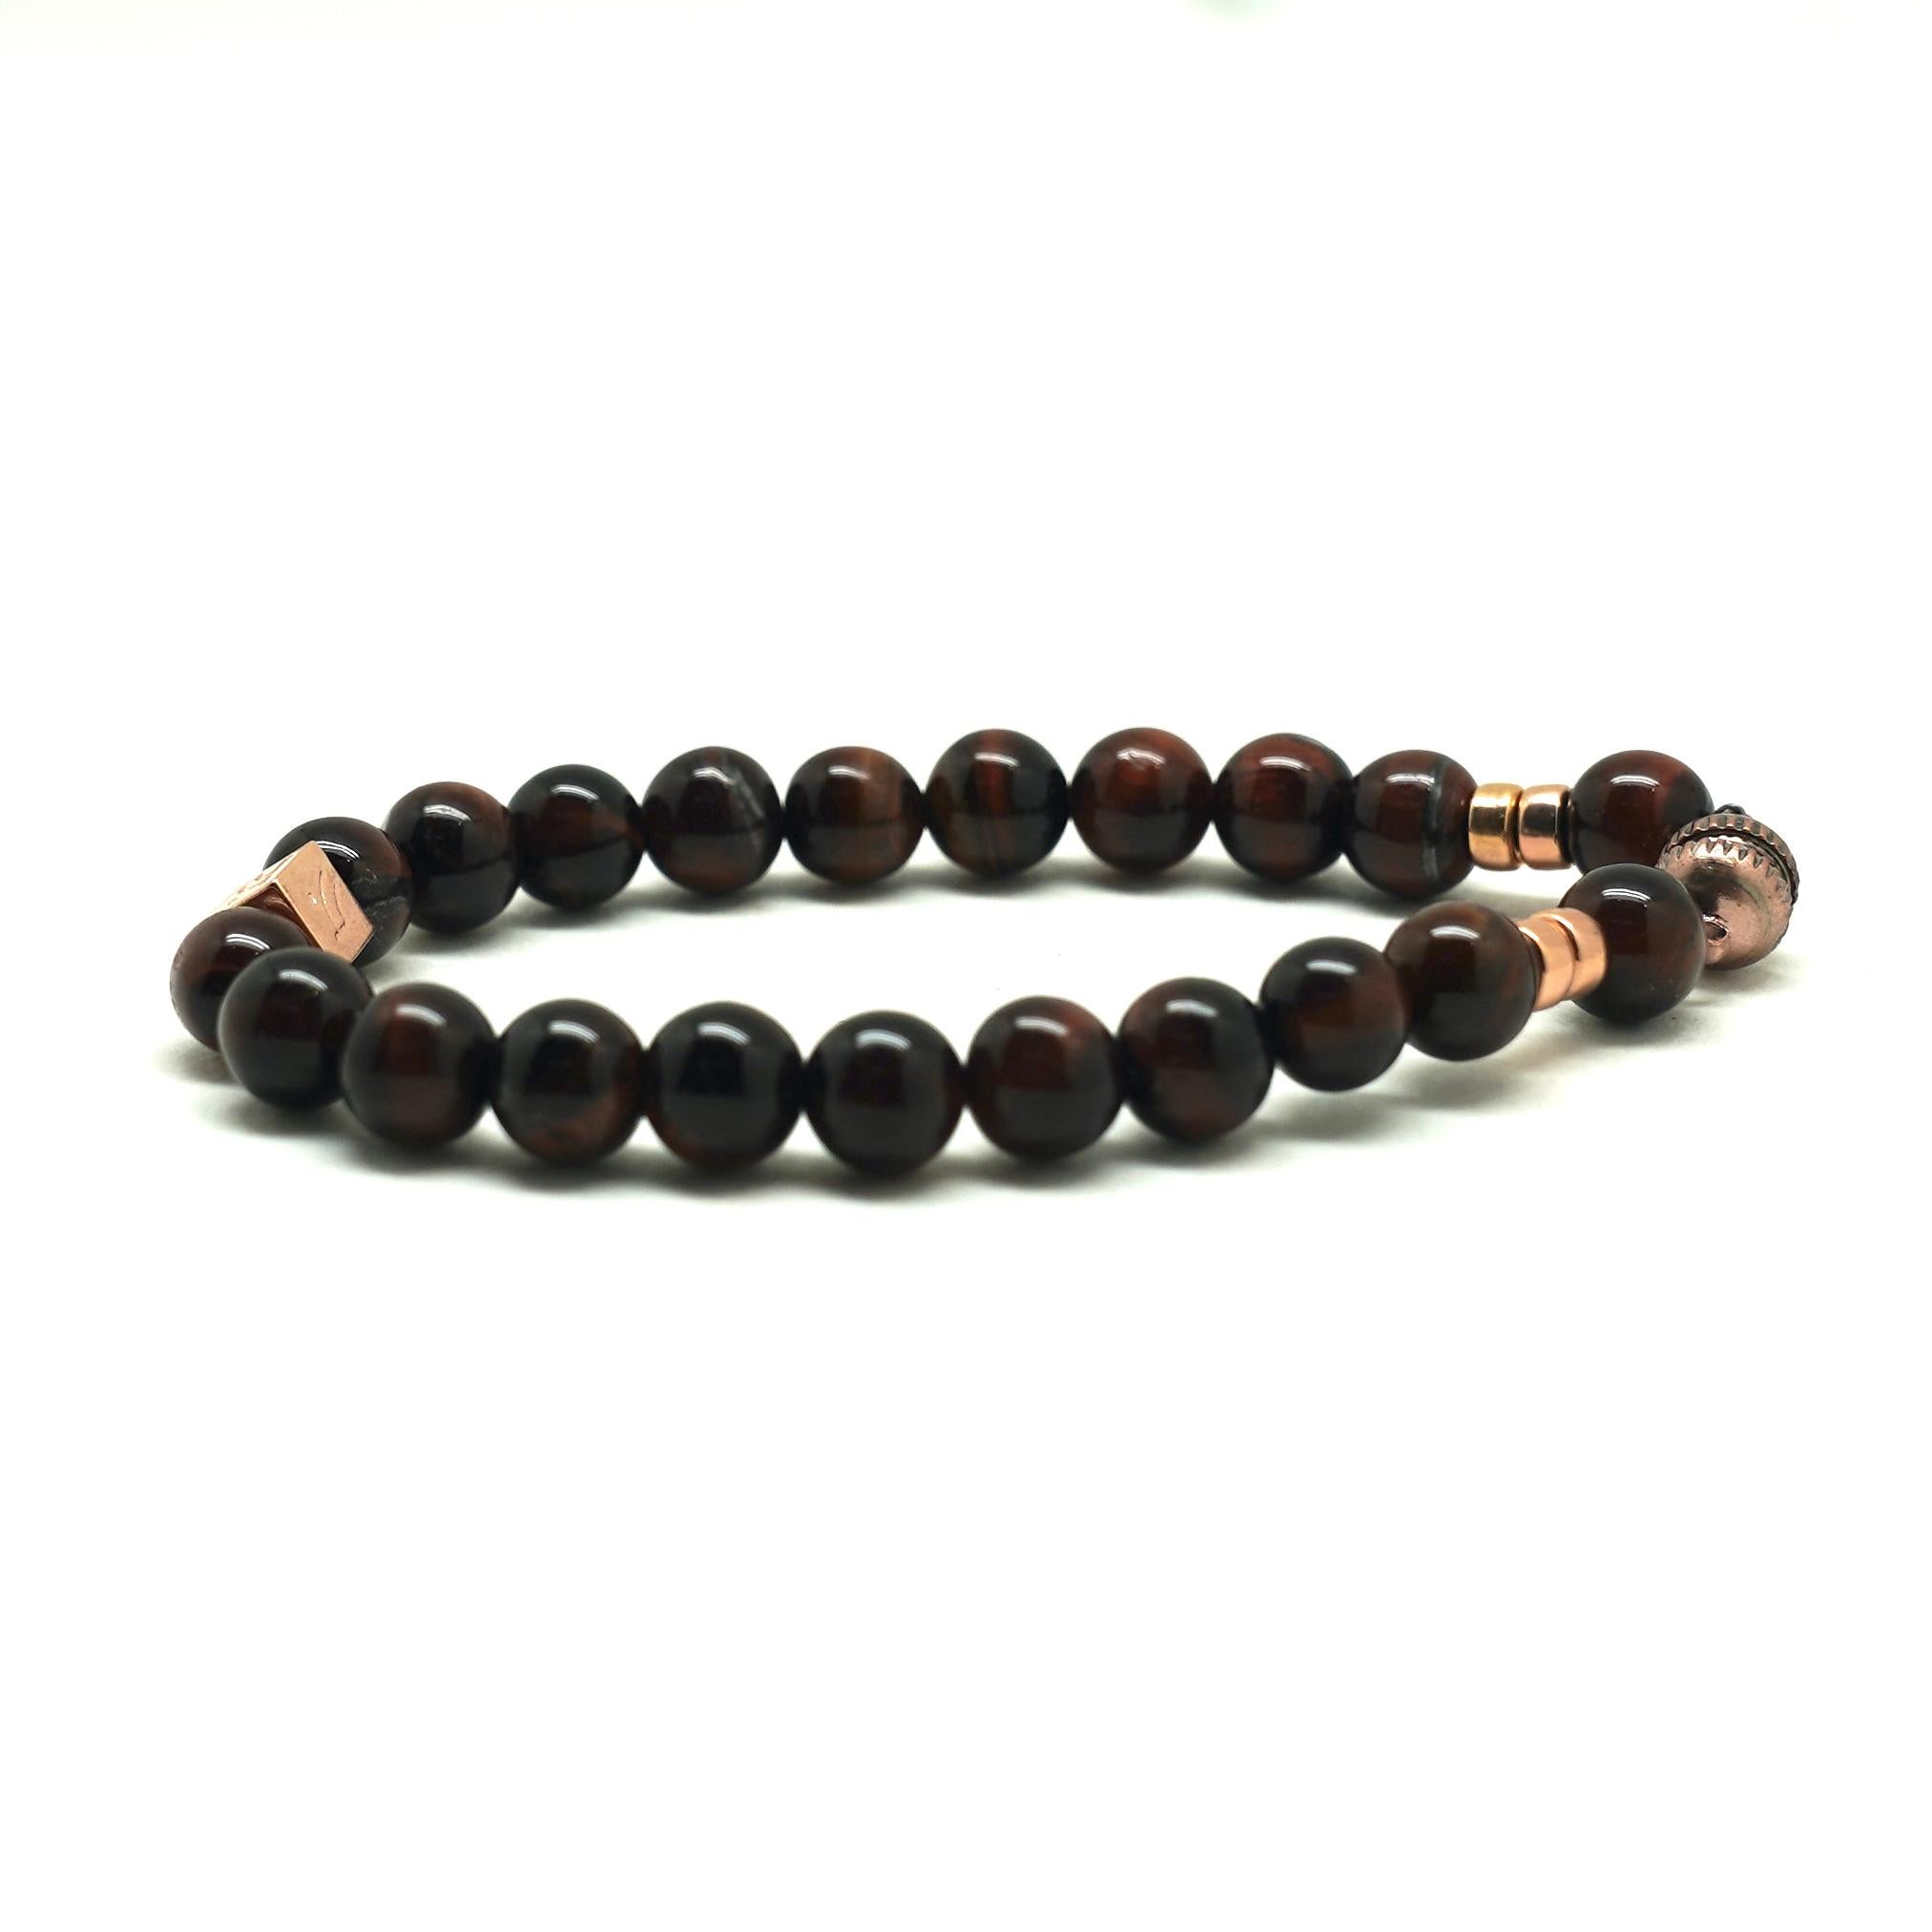 Story Behind the Jewelry
The magnetic clasp and mahogany Tiger's Eye stones on this bracelet are accented with 14K rose gold to create a robust gentlemanlike look that would enhance any outfit. The smooth and elegant beads known as the 